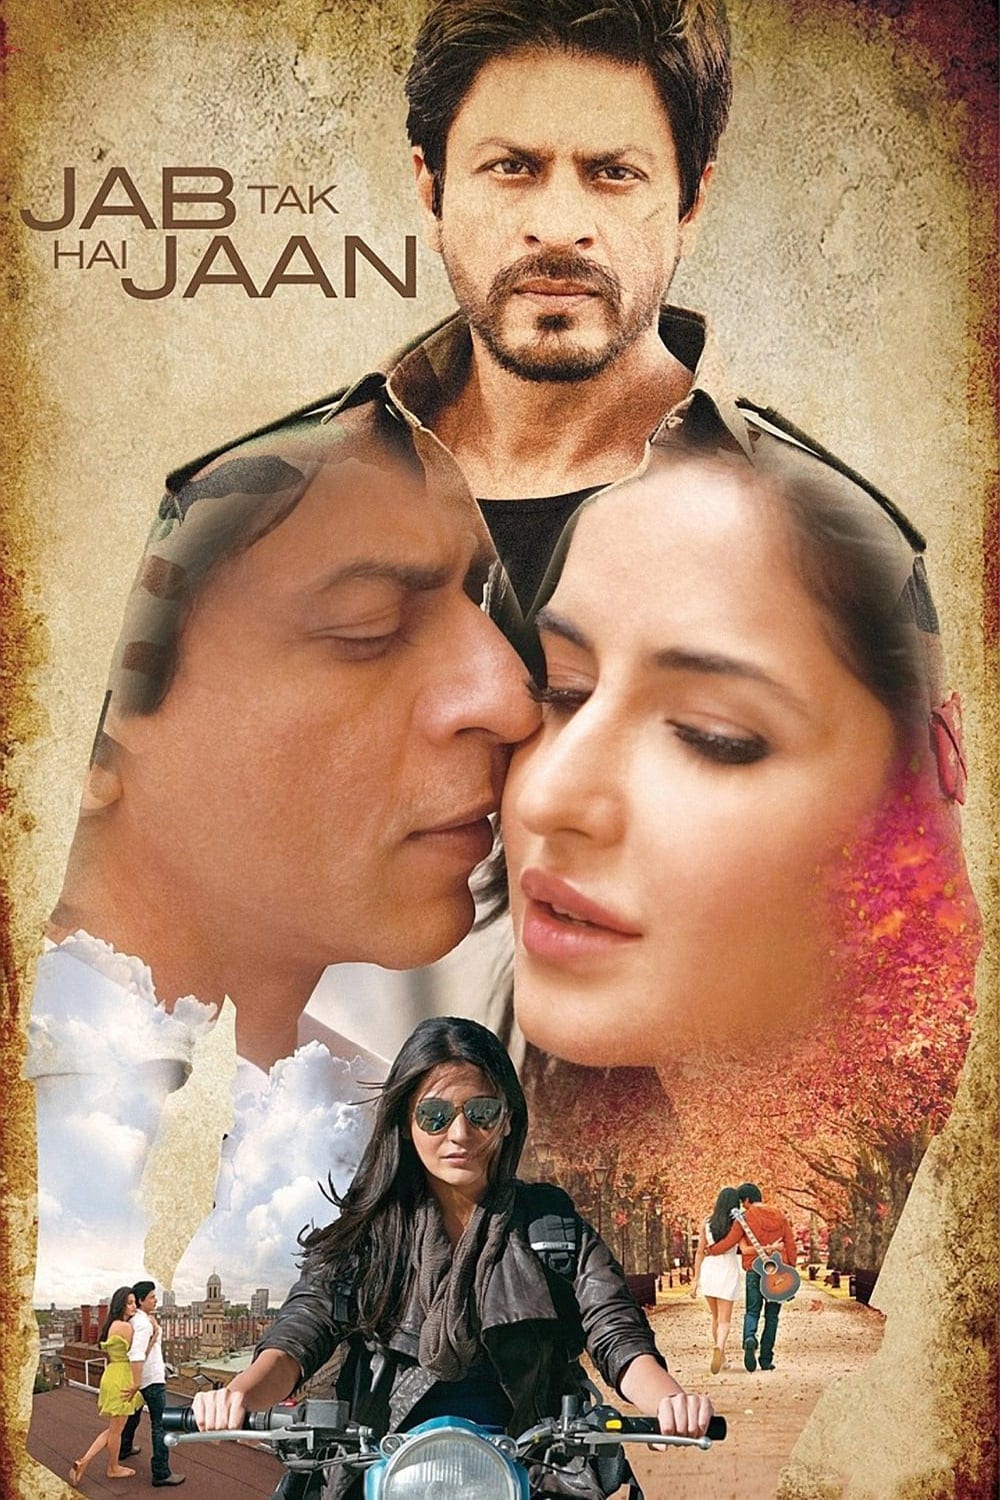 Poster for the movie "Jab Tak Hai Jaan"